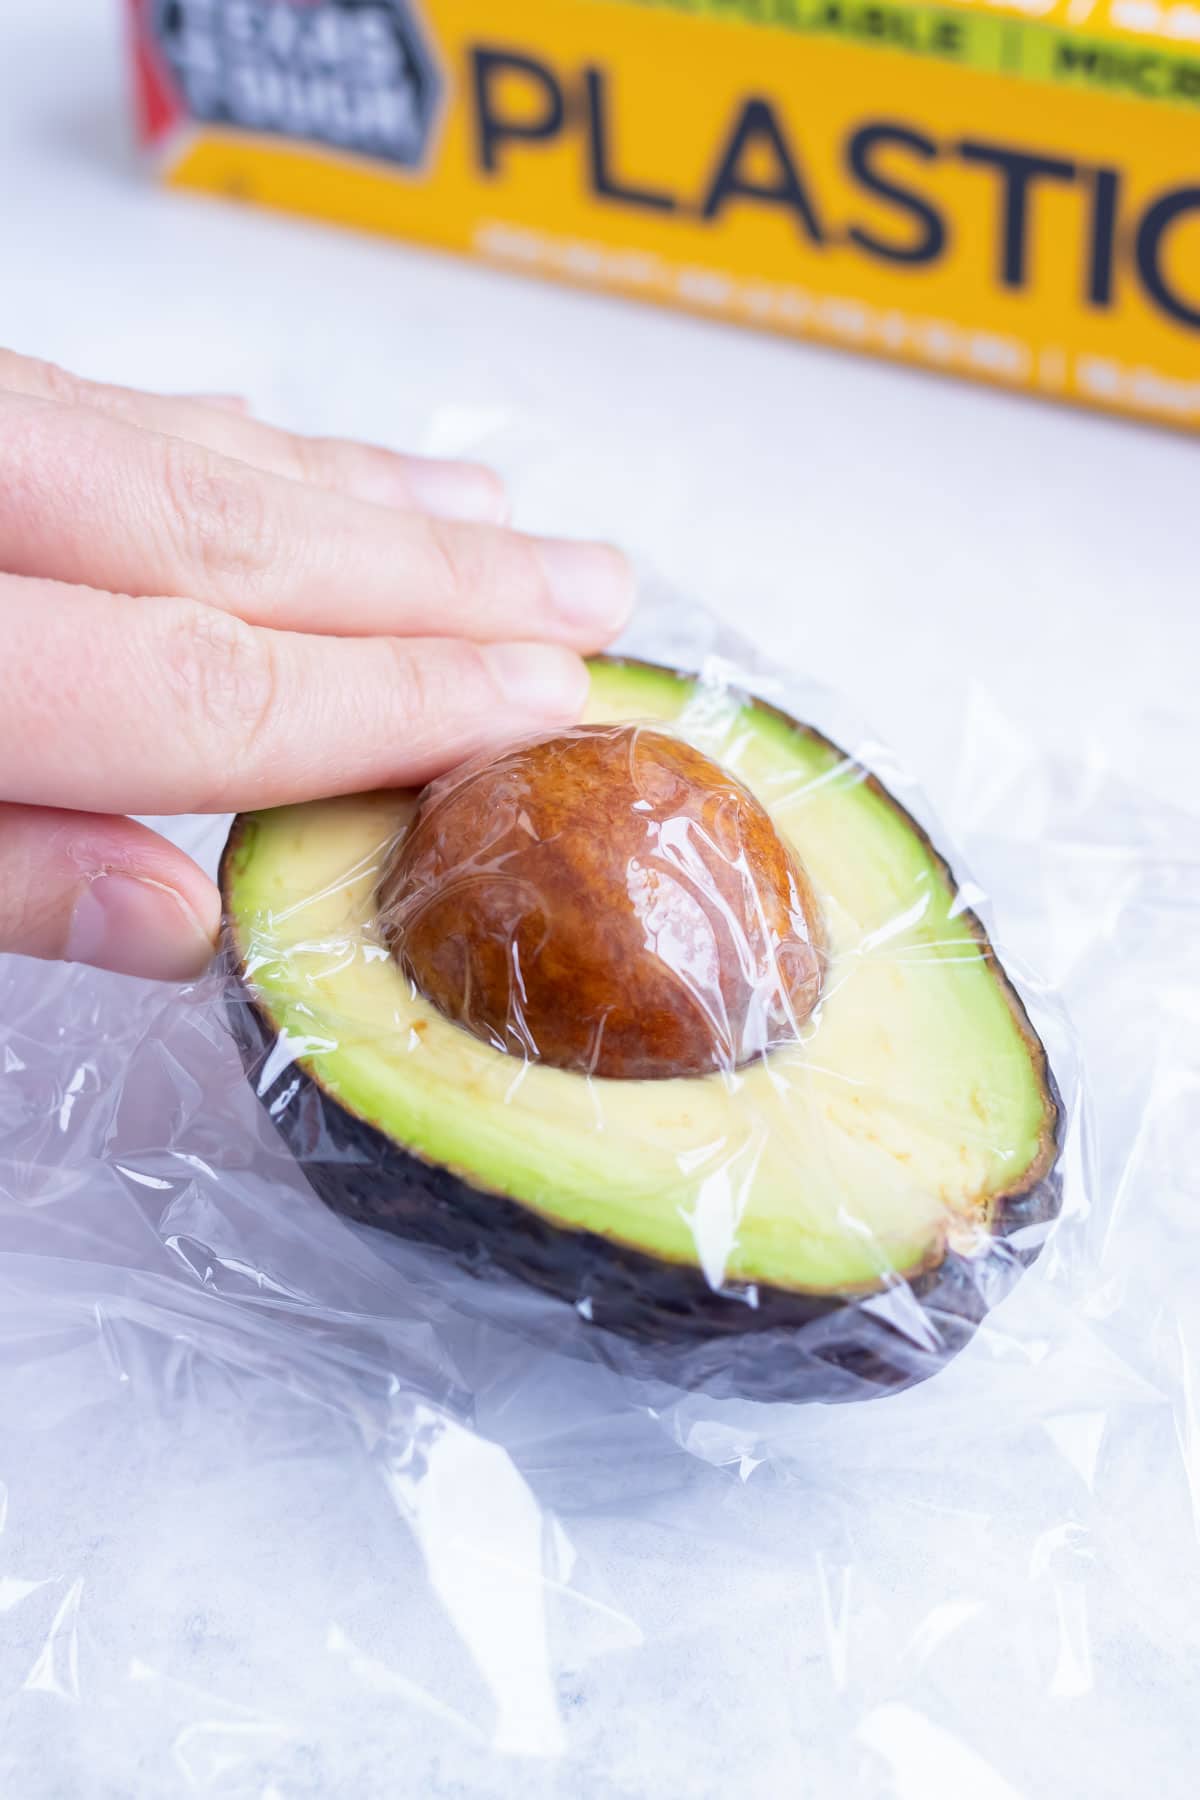 5 Tips on How to Safely Cut an Avocado